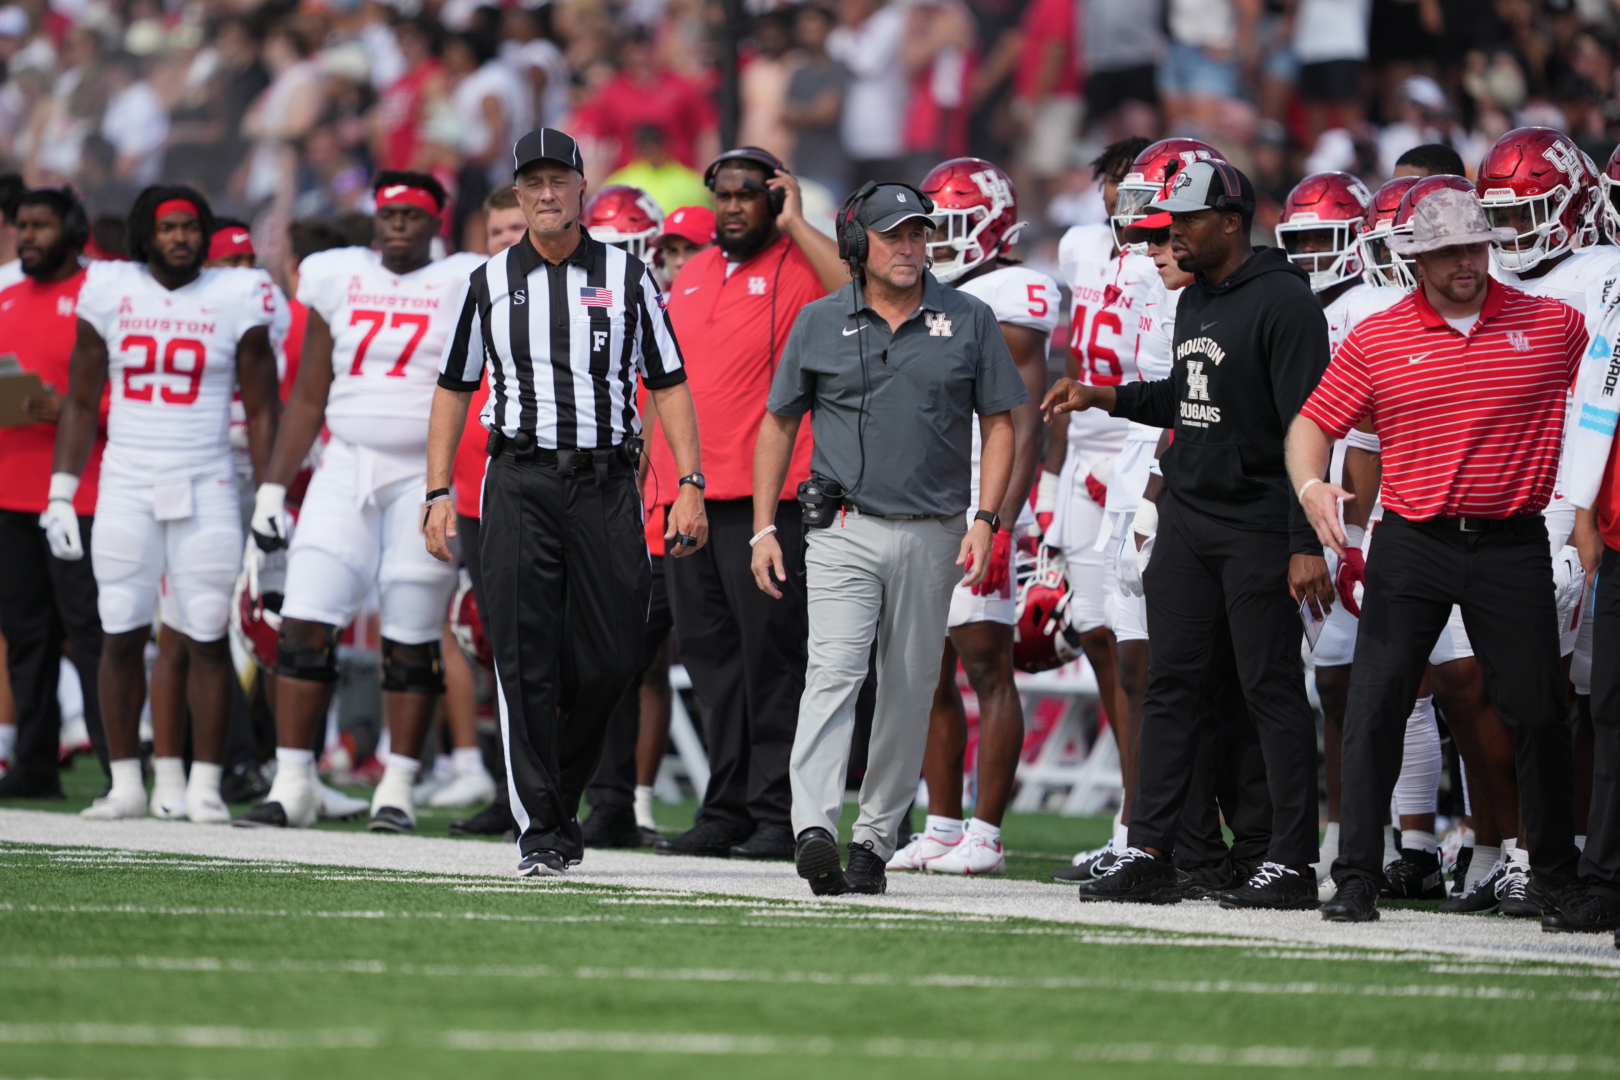 Dana Holgorsen said UH's lack of discipline was unacceptable after the Cougars' double overtime loss to Texas Tech at Jones AT&T Stadium in Lubbock on Saturday afternoon. | Courtesy of UH athletics